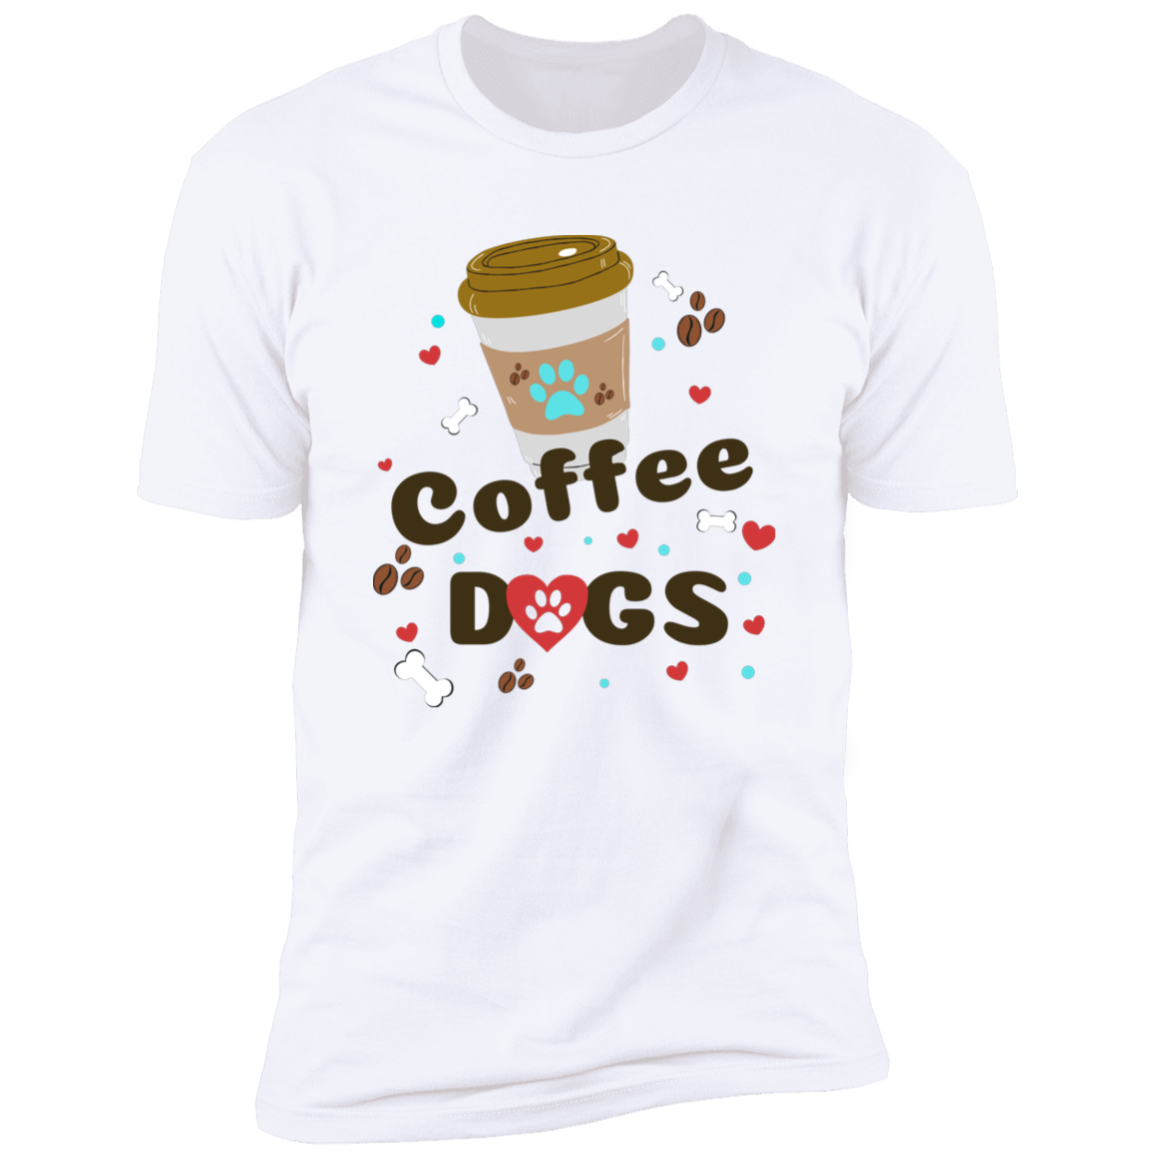 To go Coffee Dogs T-shirt, Dog Shirt for humans, in white